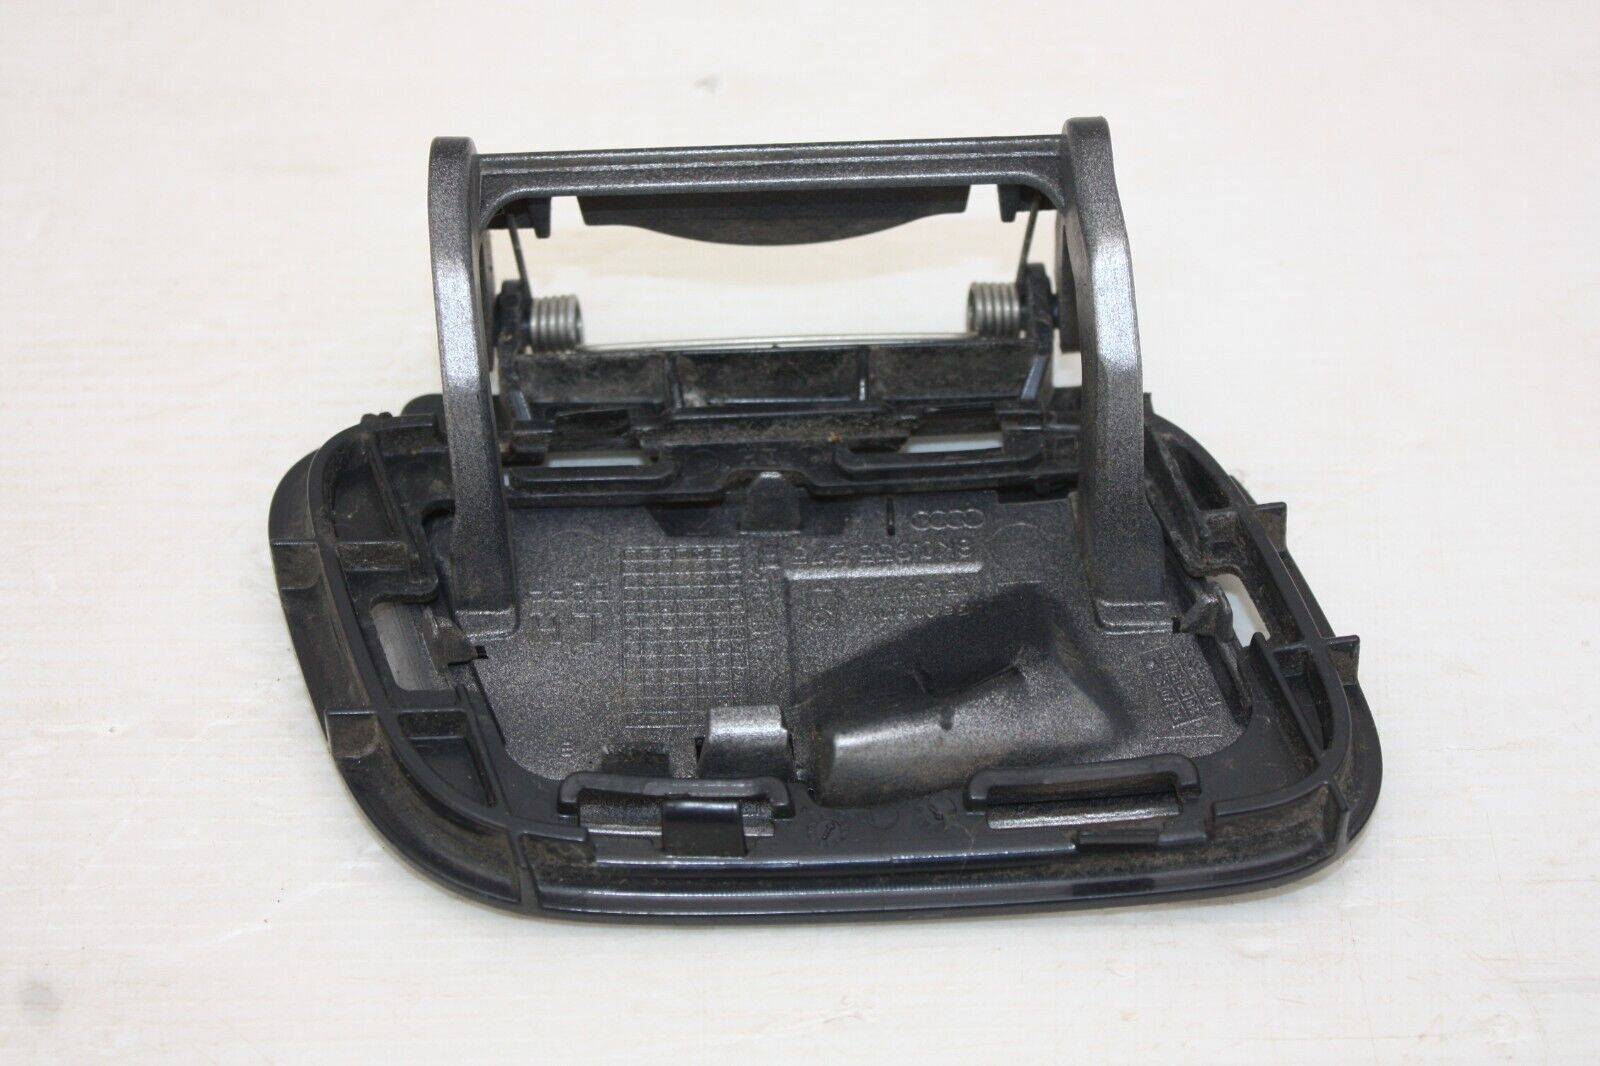 Audi-A4-B8-S-Line-Front-Bumper-Left-Shower-Cover-2012-TO-2015-8K0955275H-Genuine-175660065897-4